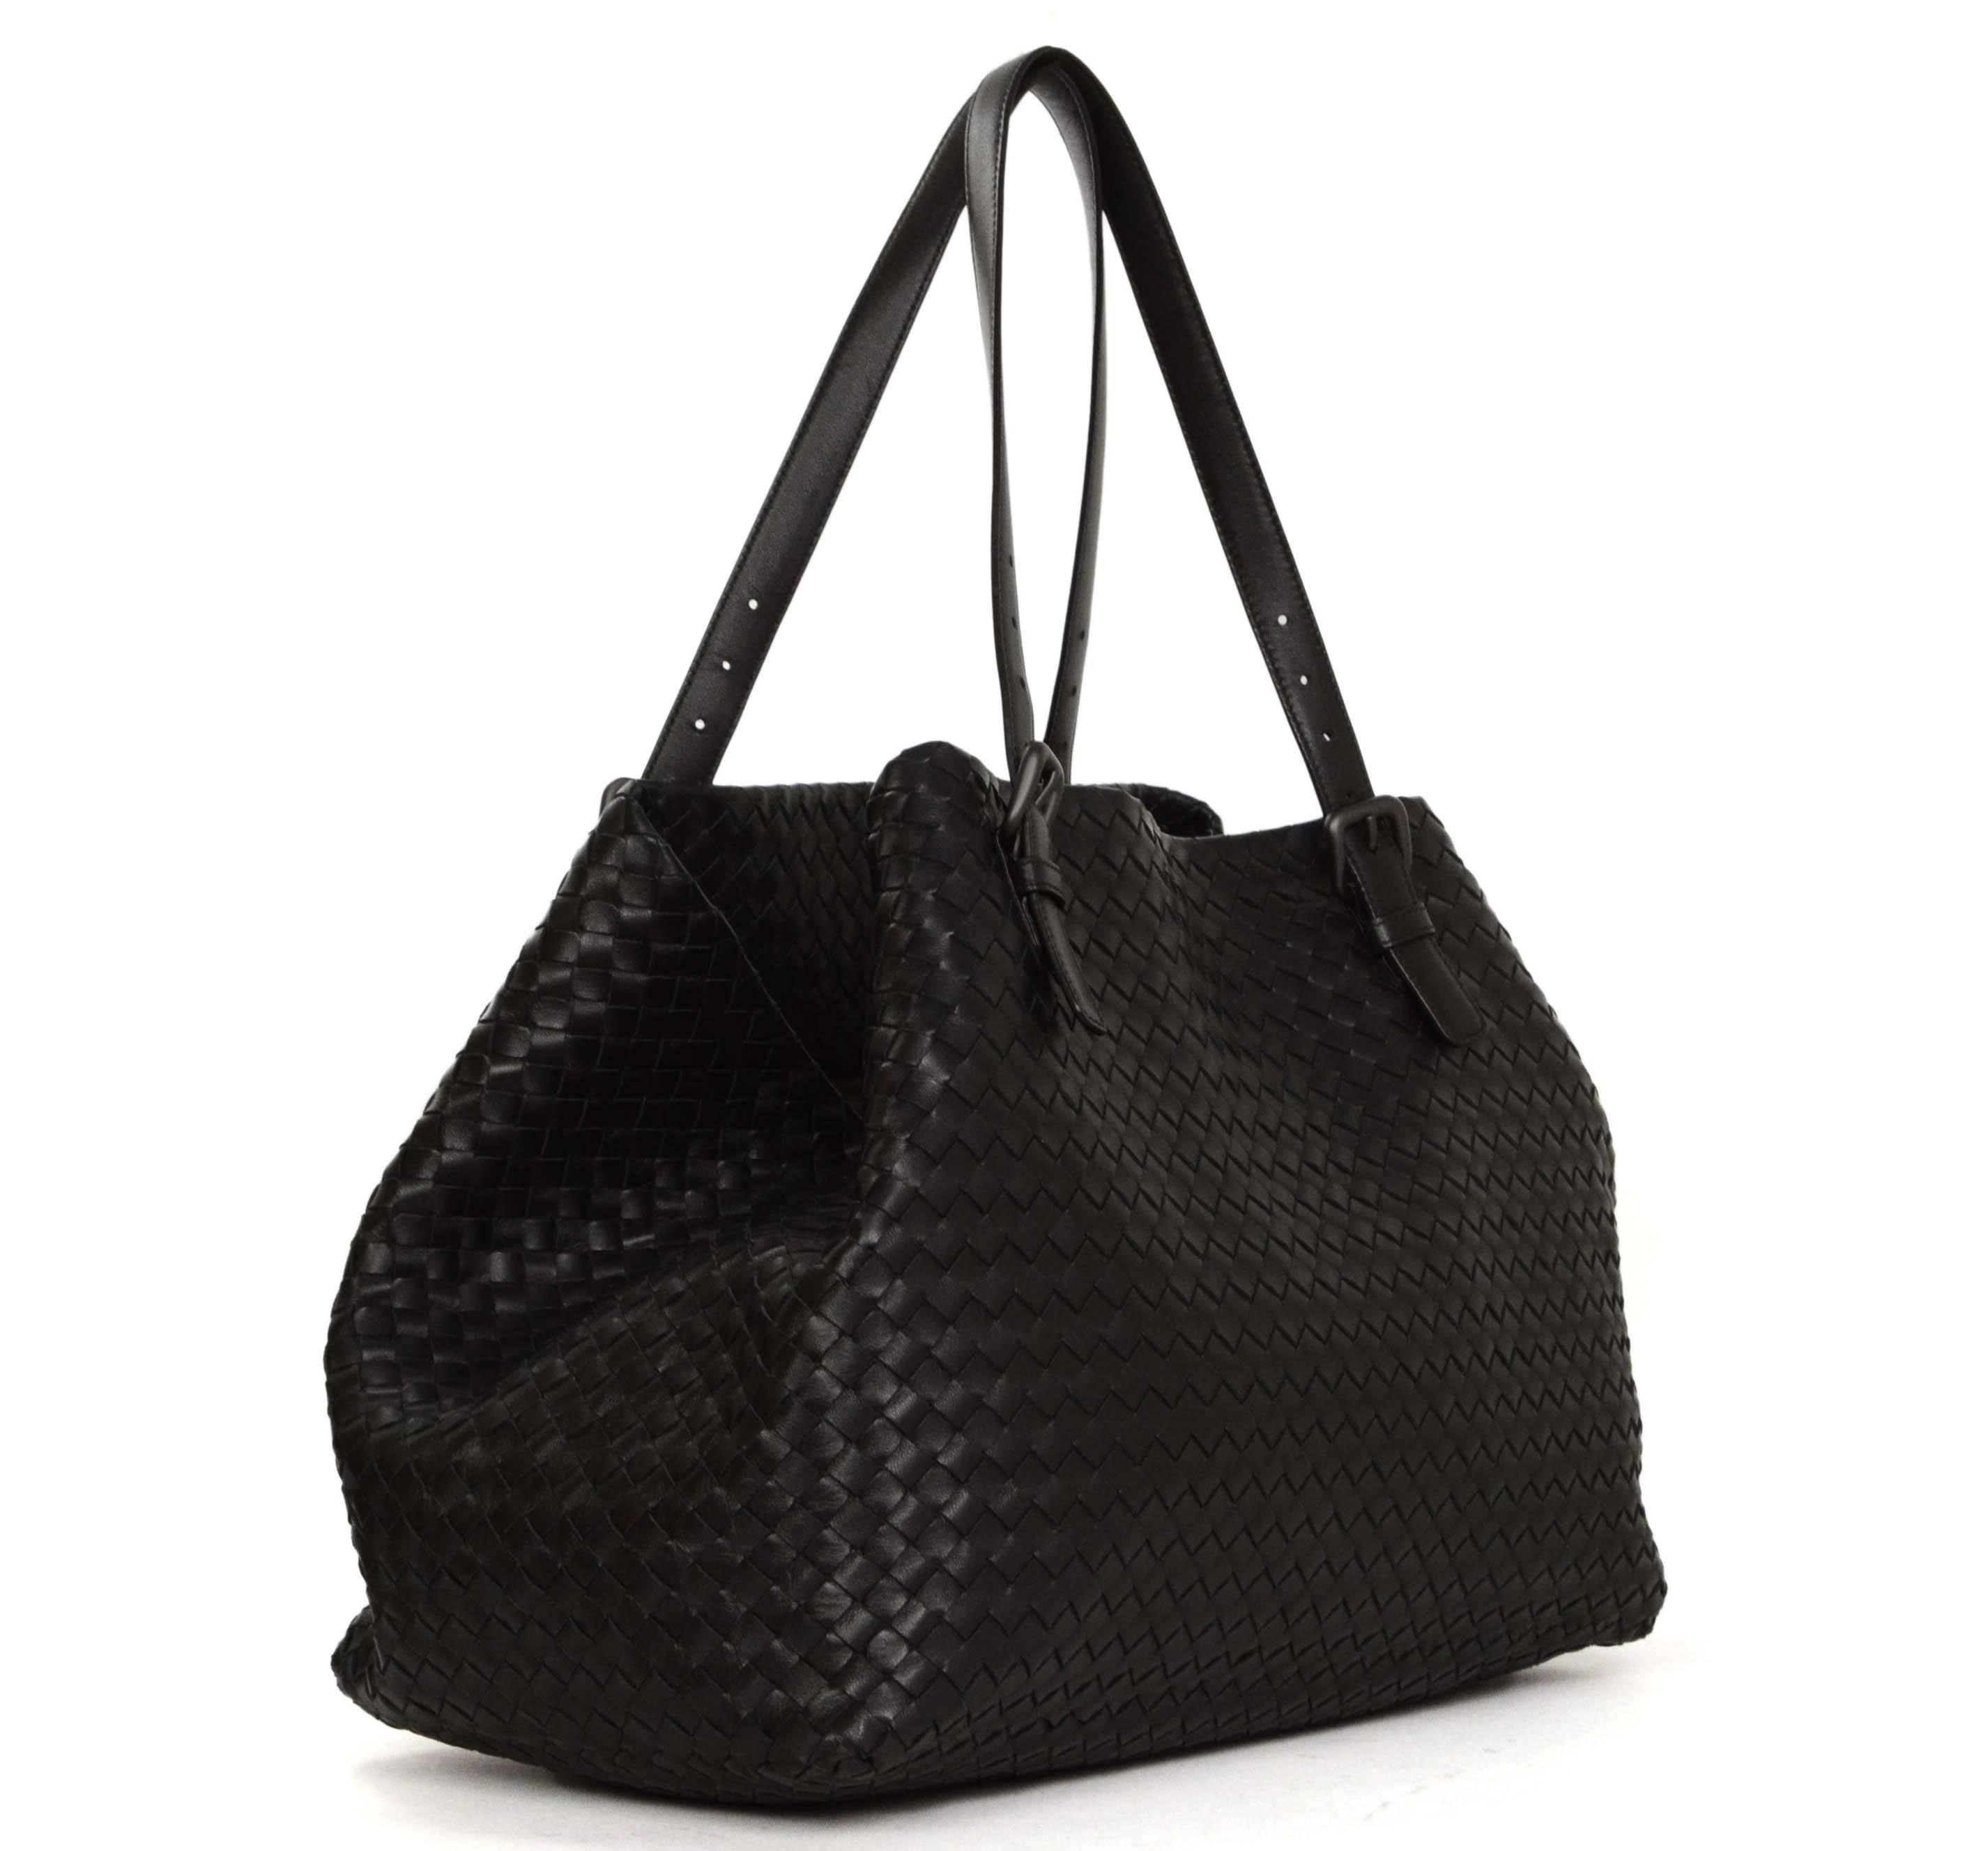 Bottega Veneta Black Woven Leather Large 'Intrecciato' Bag 
Features adjustable shoulder straps
Made In: Italy
Color: Black
Hardware: Gunmetal/black
Materials: Leather
Lining: Grey suede
Closure/Opening: Open top with latch on sides for